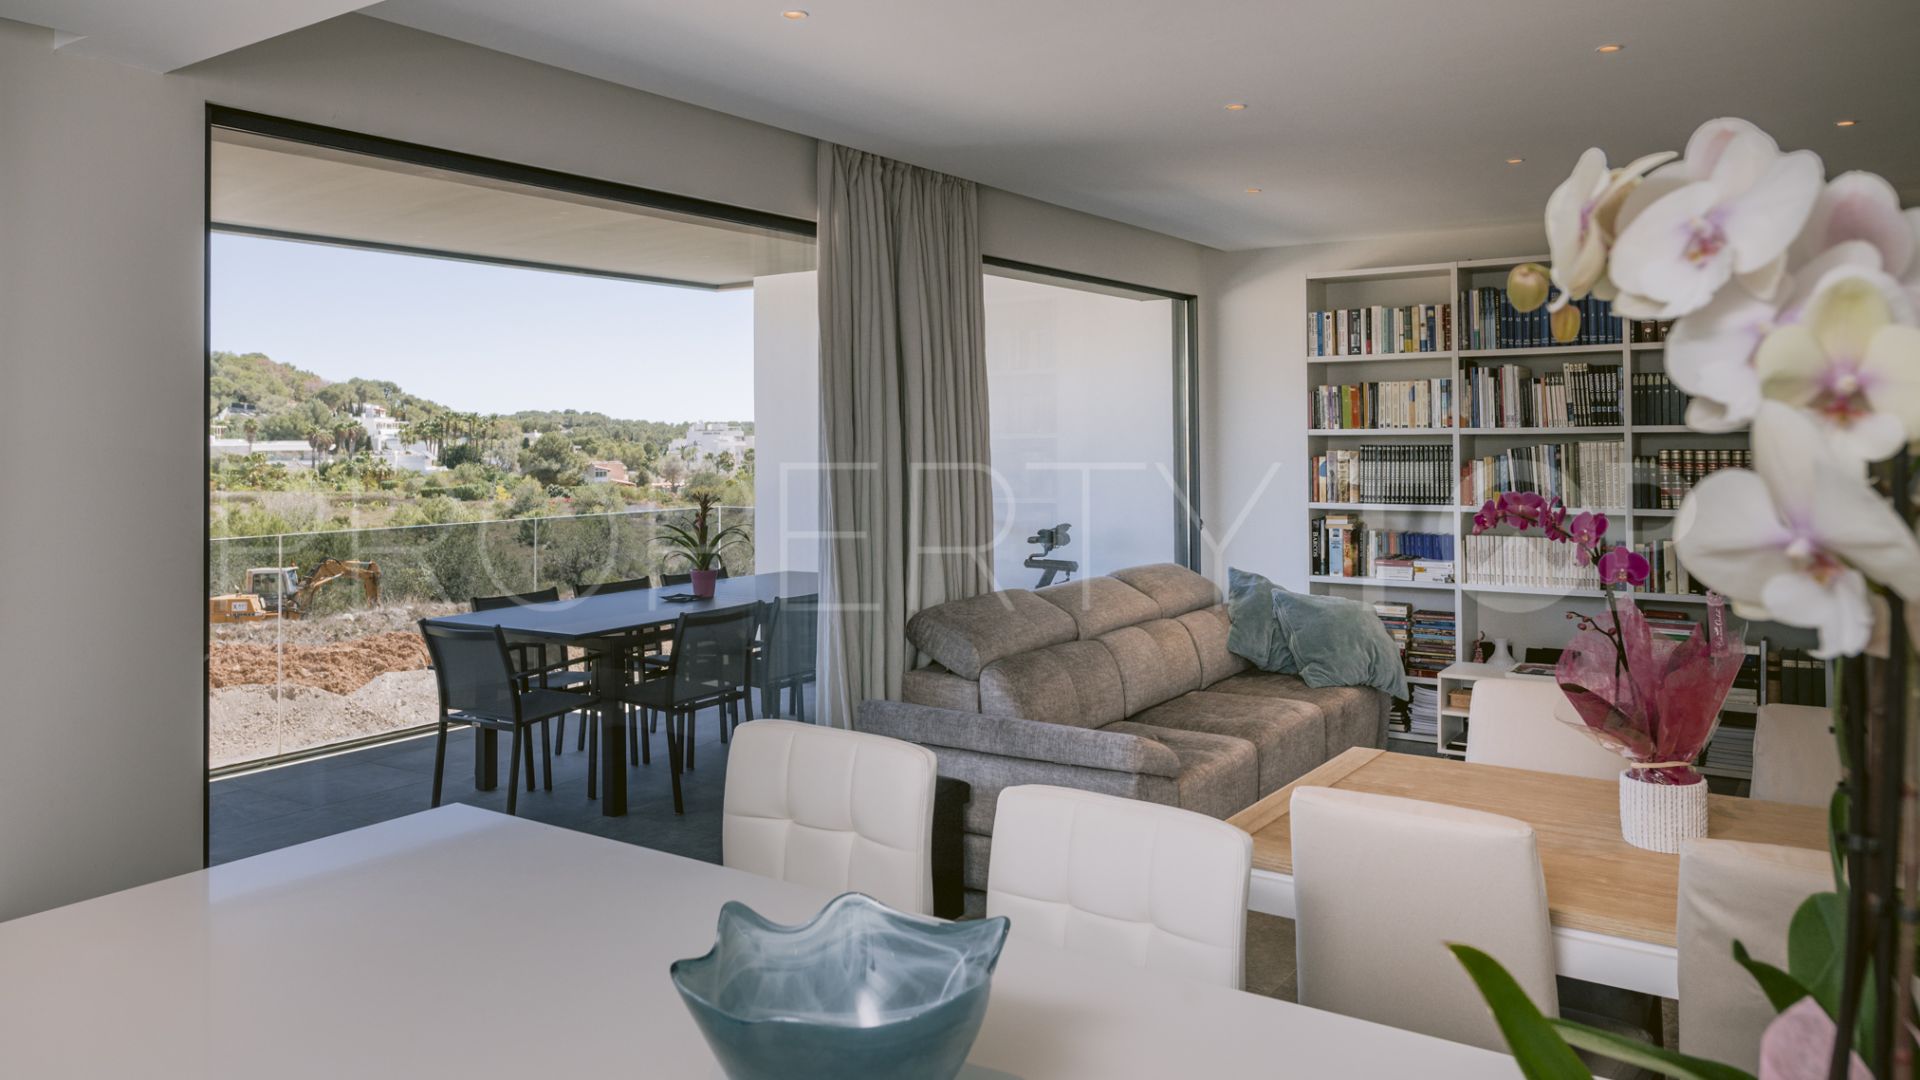 3 bedrooms apartment in Ibiza for sale